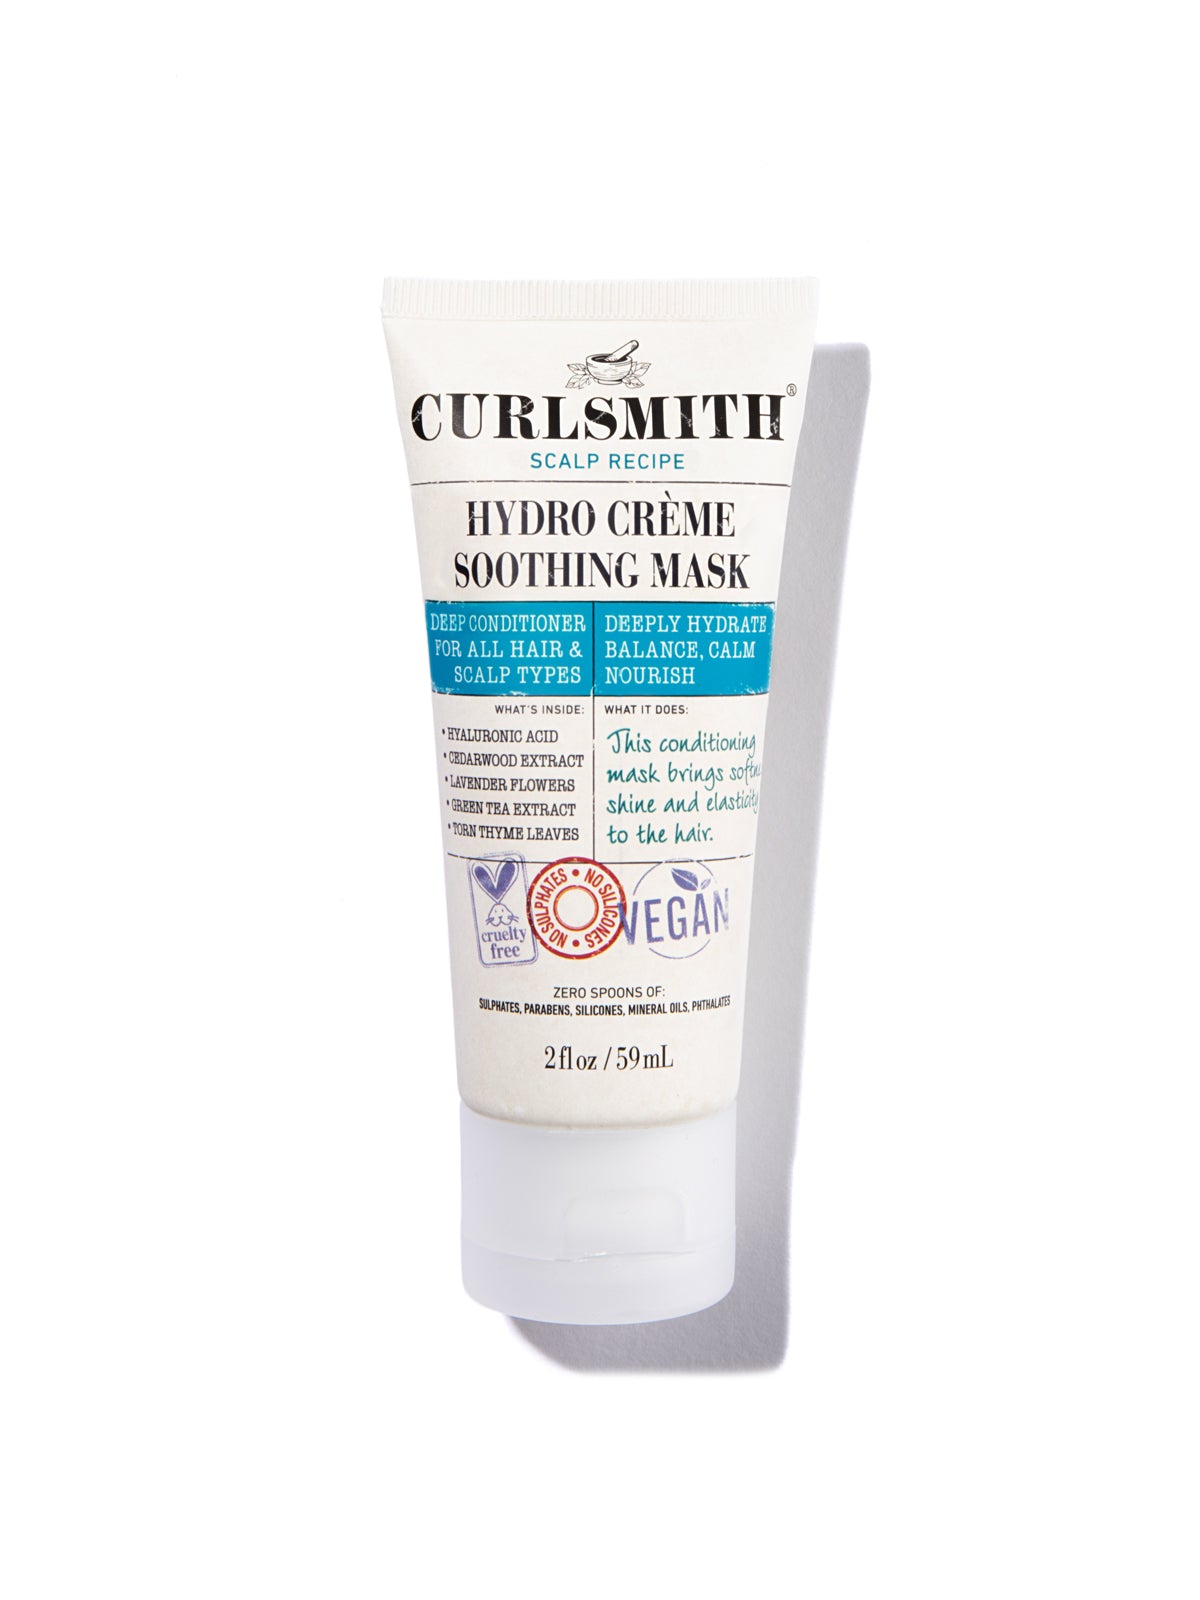 Curlsmith Hydro Creme Soothing Mask - Travel Size